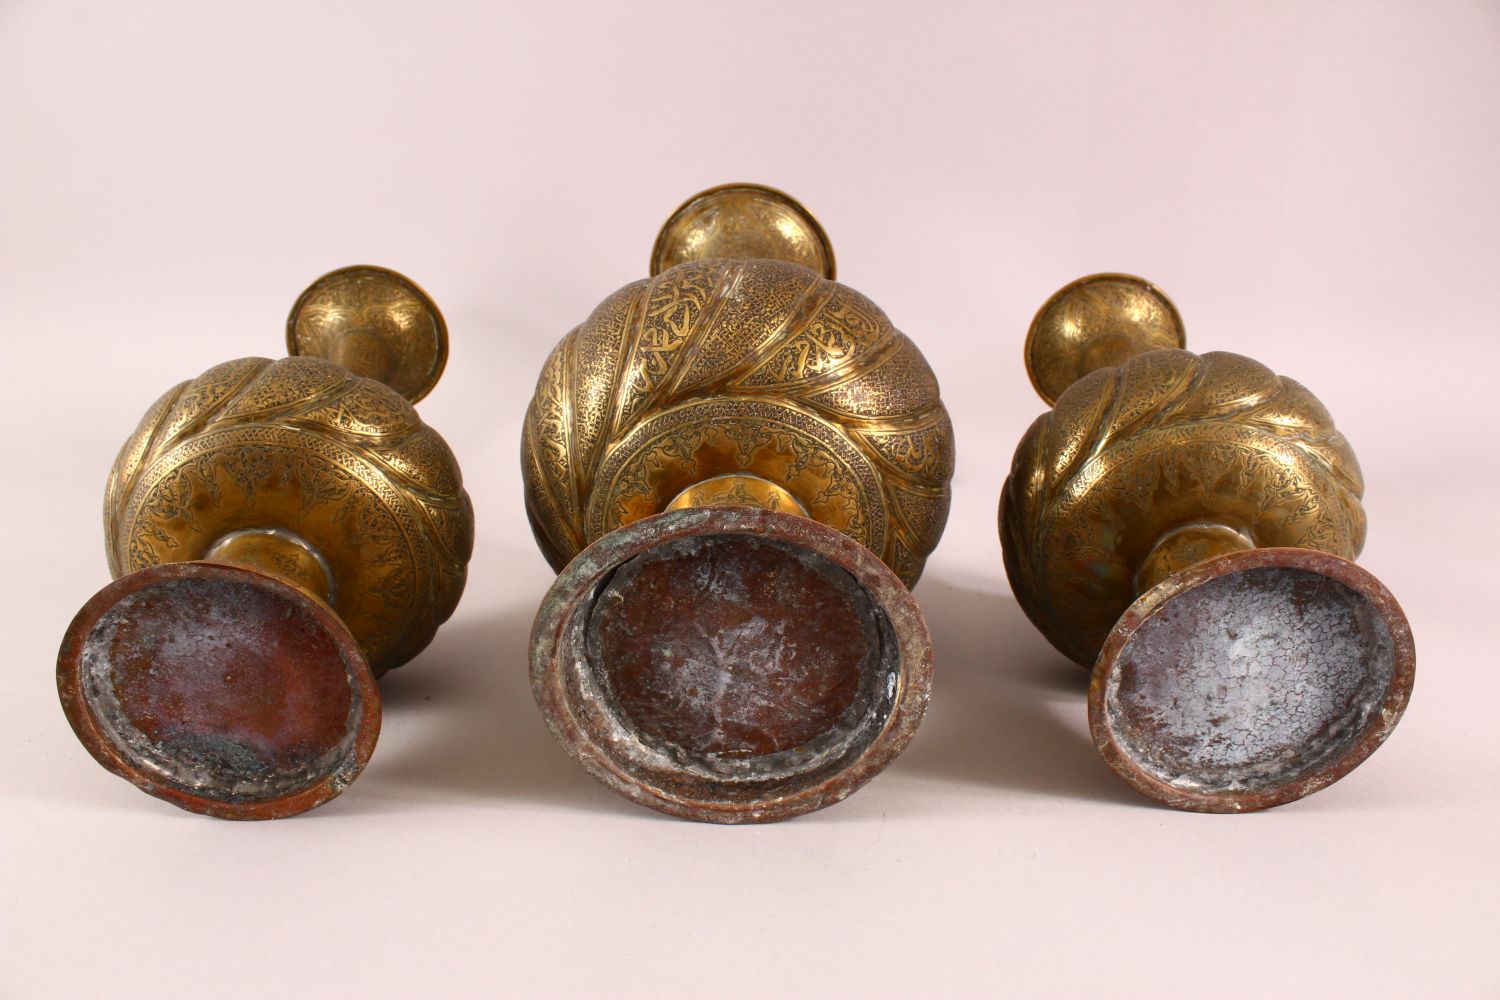 THREE PERSIAN ISLAMIC CALLIGRAPHIC BRASS VASES, each with calligraphy and motif decoration, 43cm , - Image 9 of 9